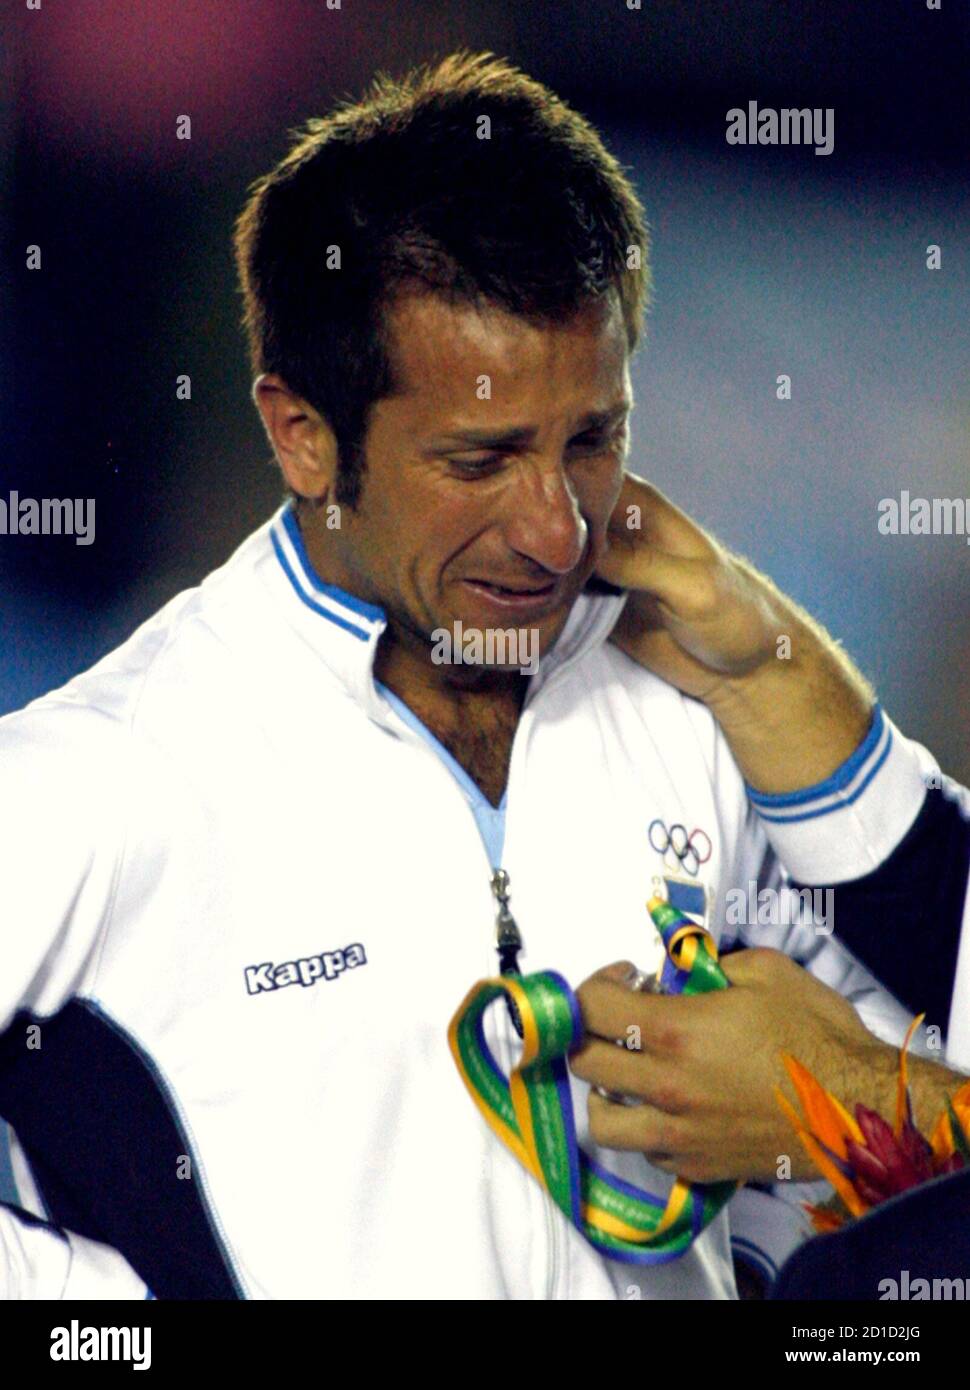 Argentina's captain Mario Almada reacts at the podium during the award  ceremony of the men's field hockey final match at the Pan American Games in  Rio De Janeiro, July 25, 2007. Canada